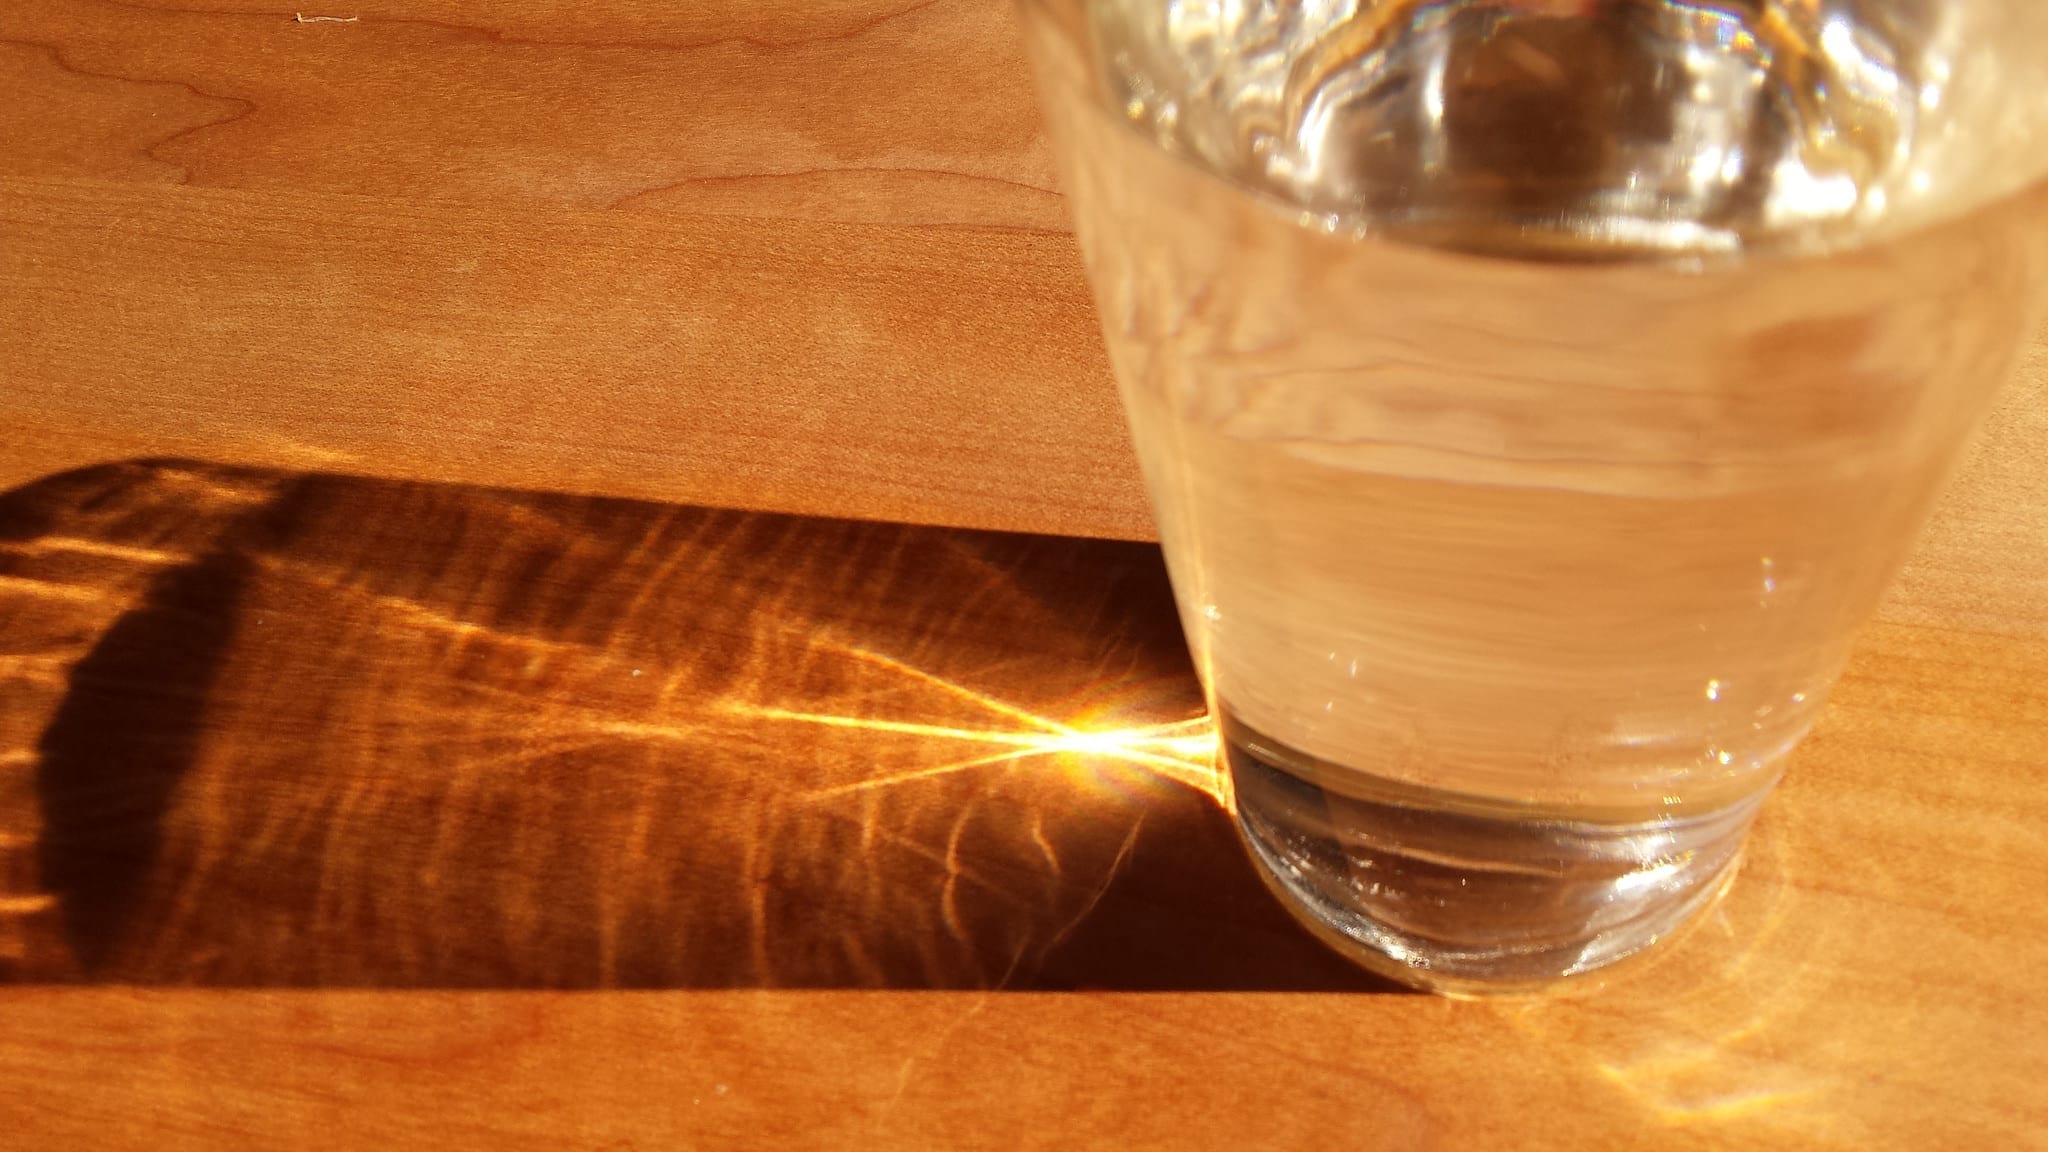 Example of clean water; image by Wonderlane, lense effect, light through a glass of water, via Flickr, CC BY 2.0.